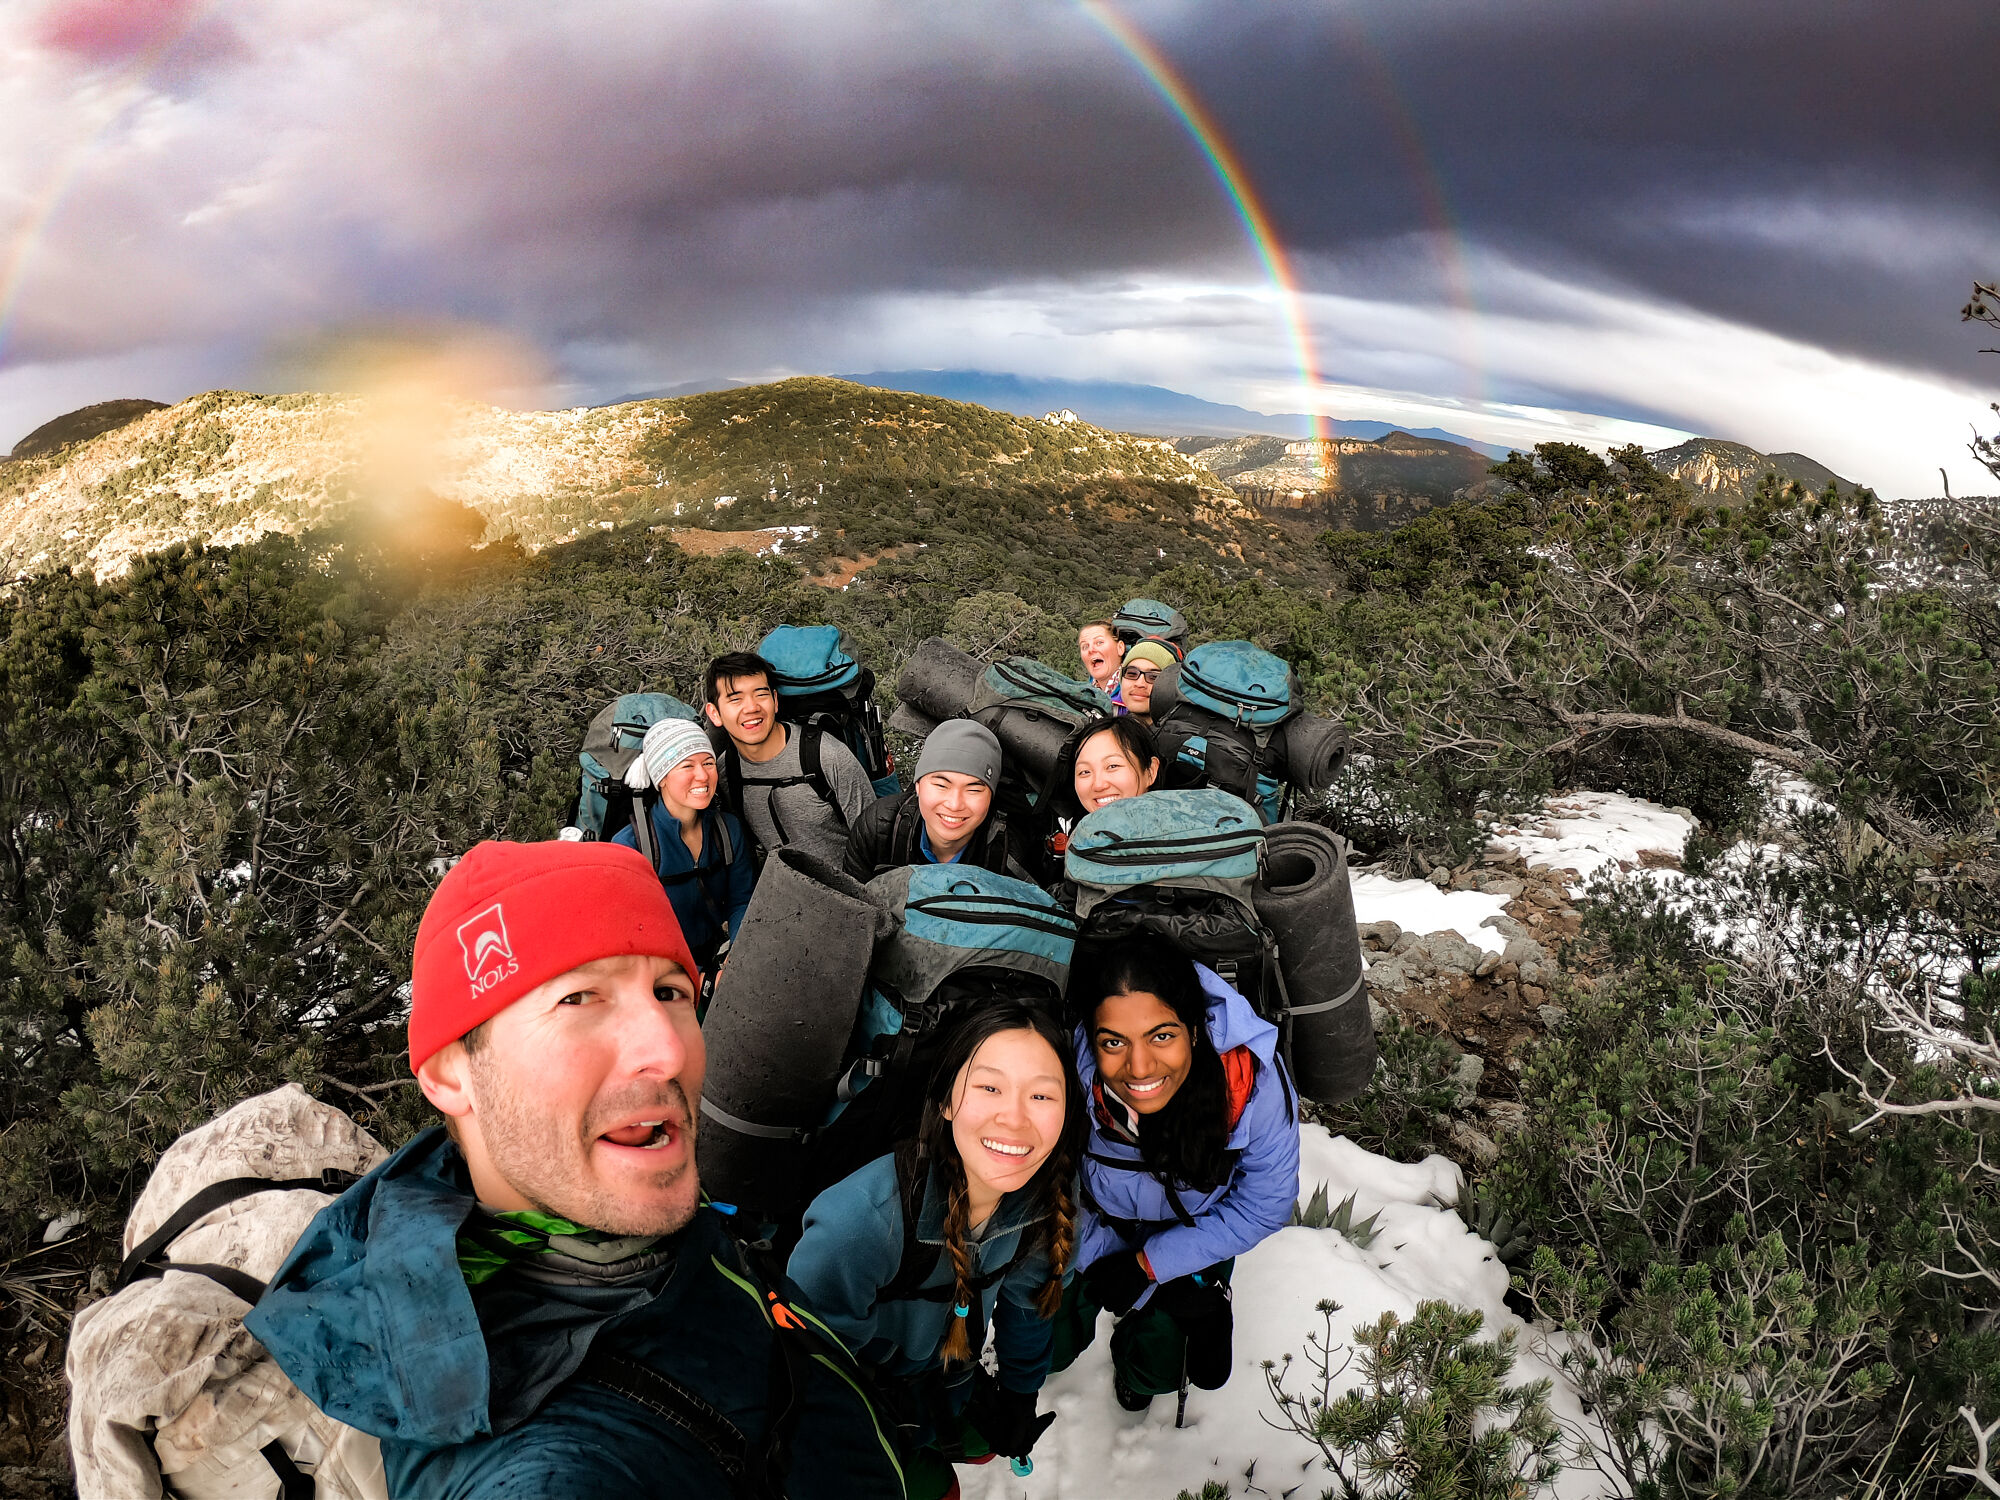 Group smiles with a rainbow in the background